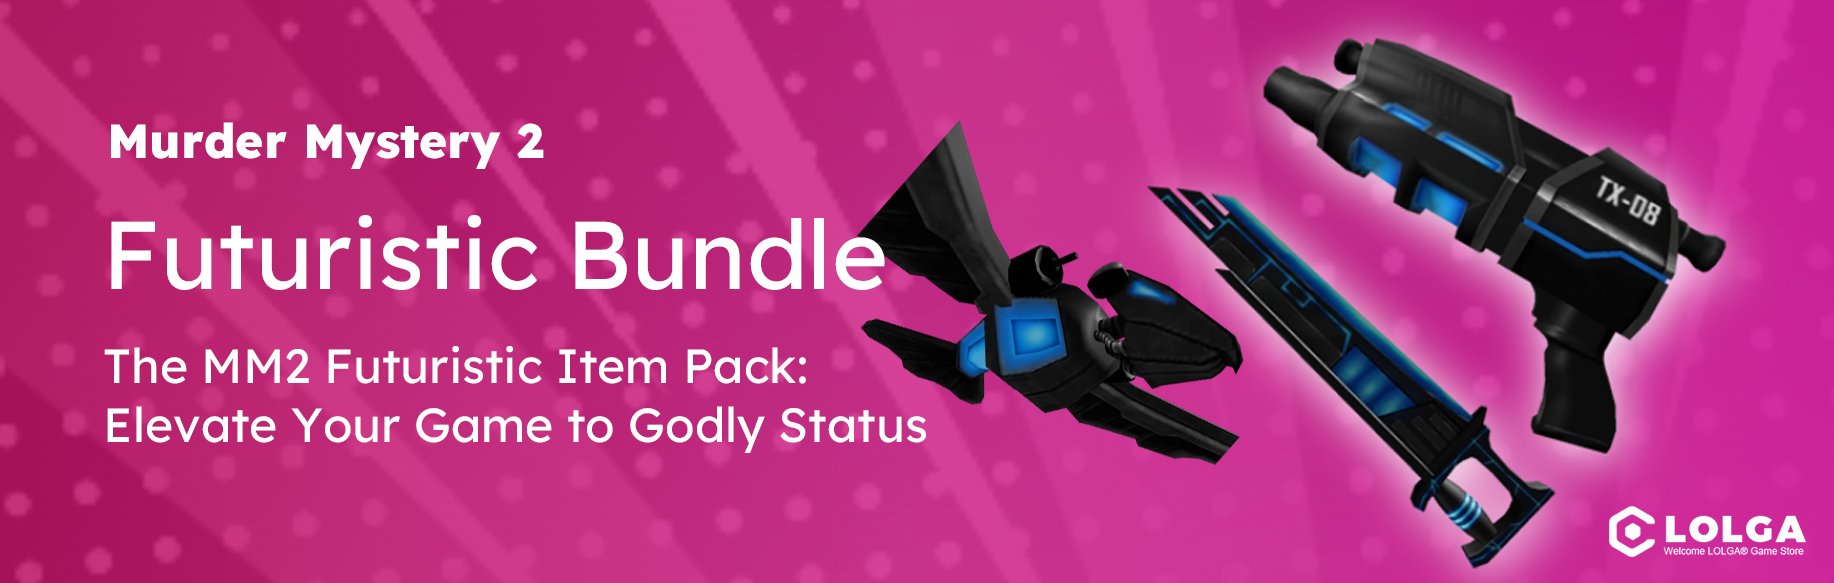 The MM2 Futuristic Item Pack: Elevate Your Game to Godly Status